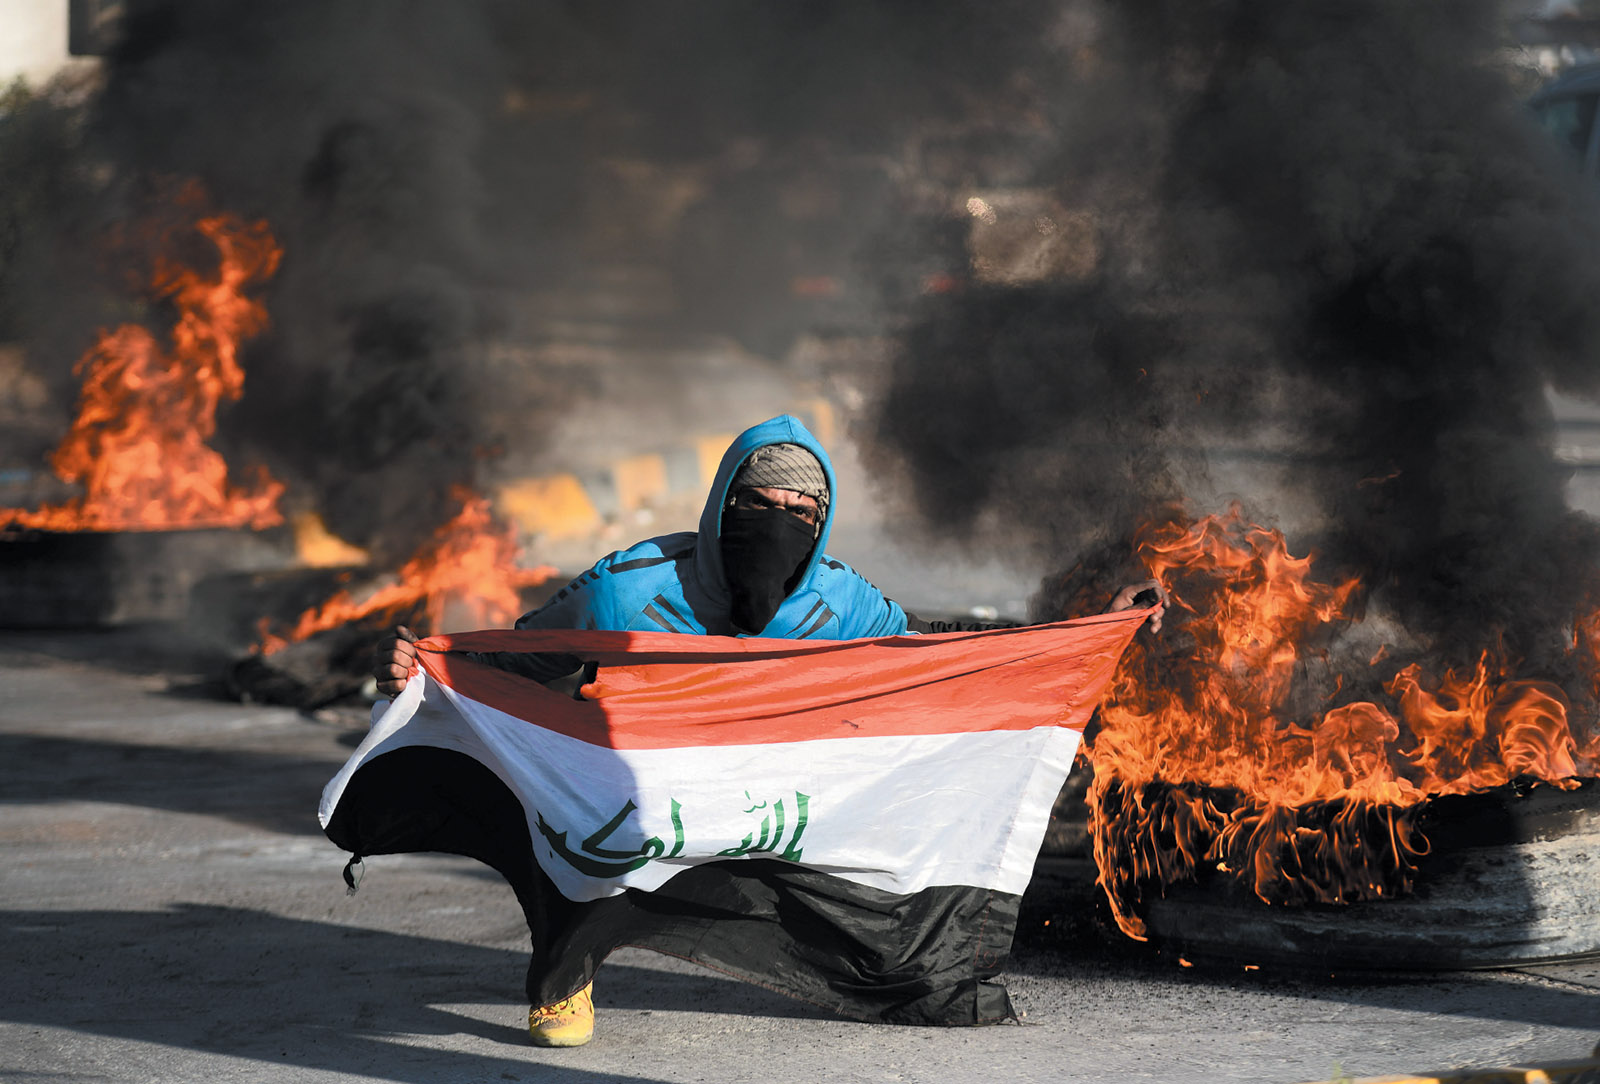 An Iraqi protesting the use of his country in the conflict between the US and Iran, Najaf, January 2020